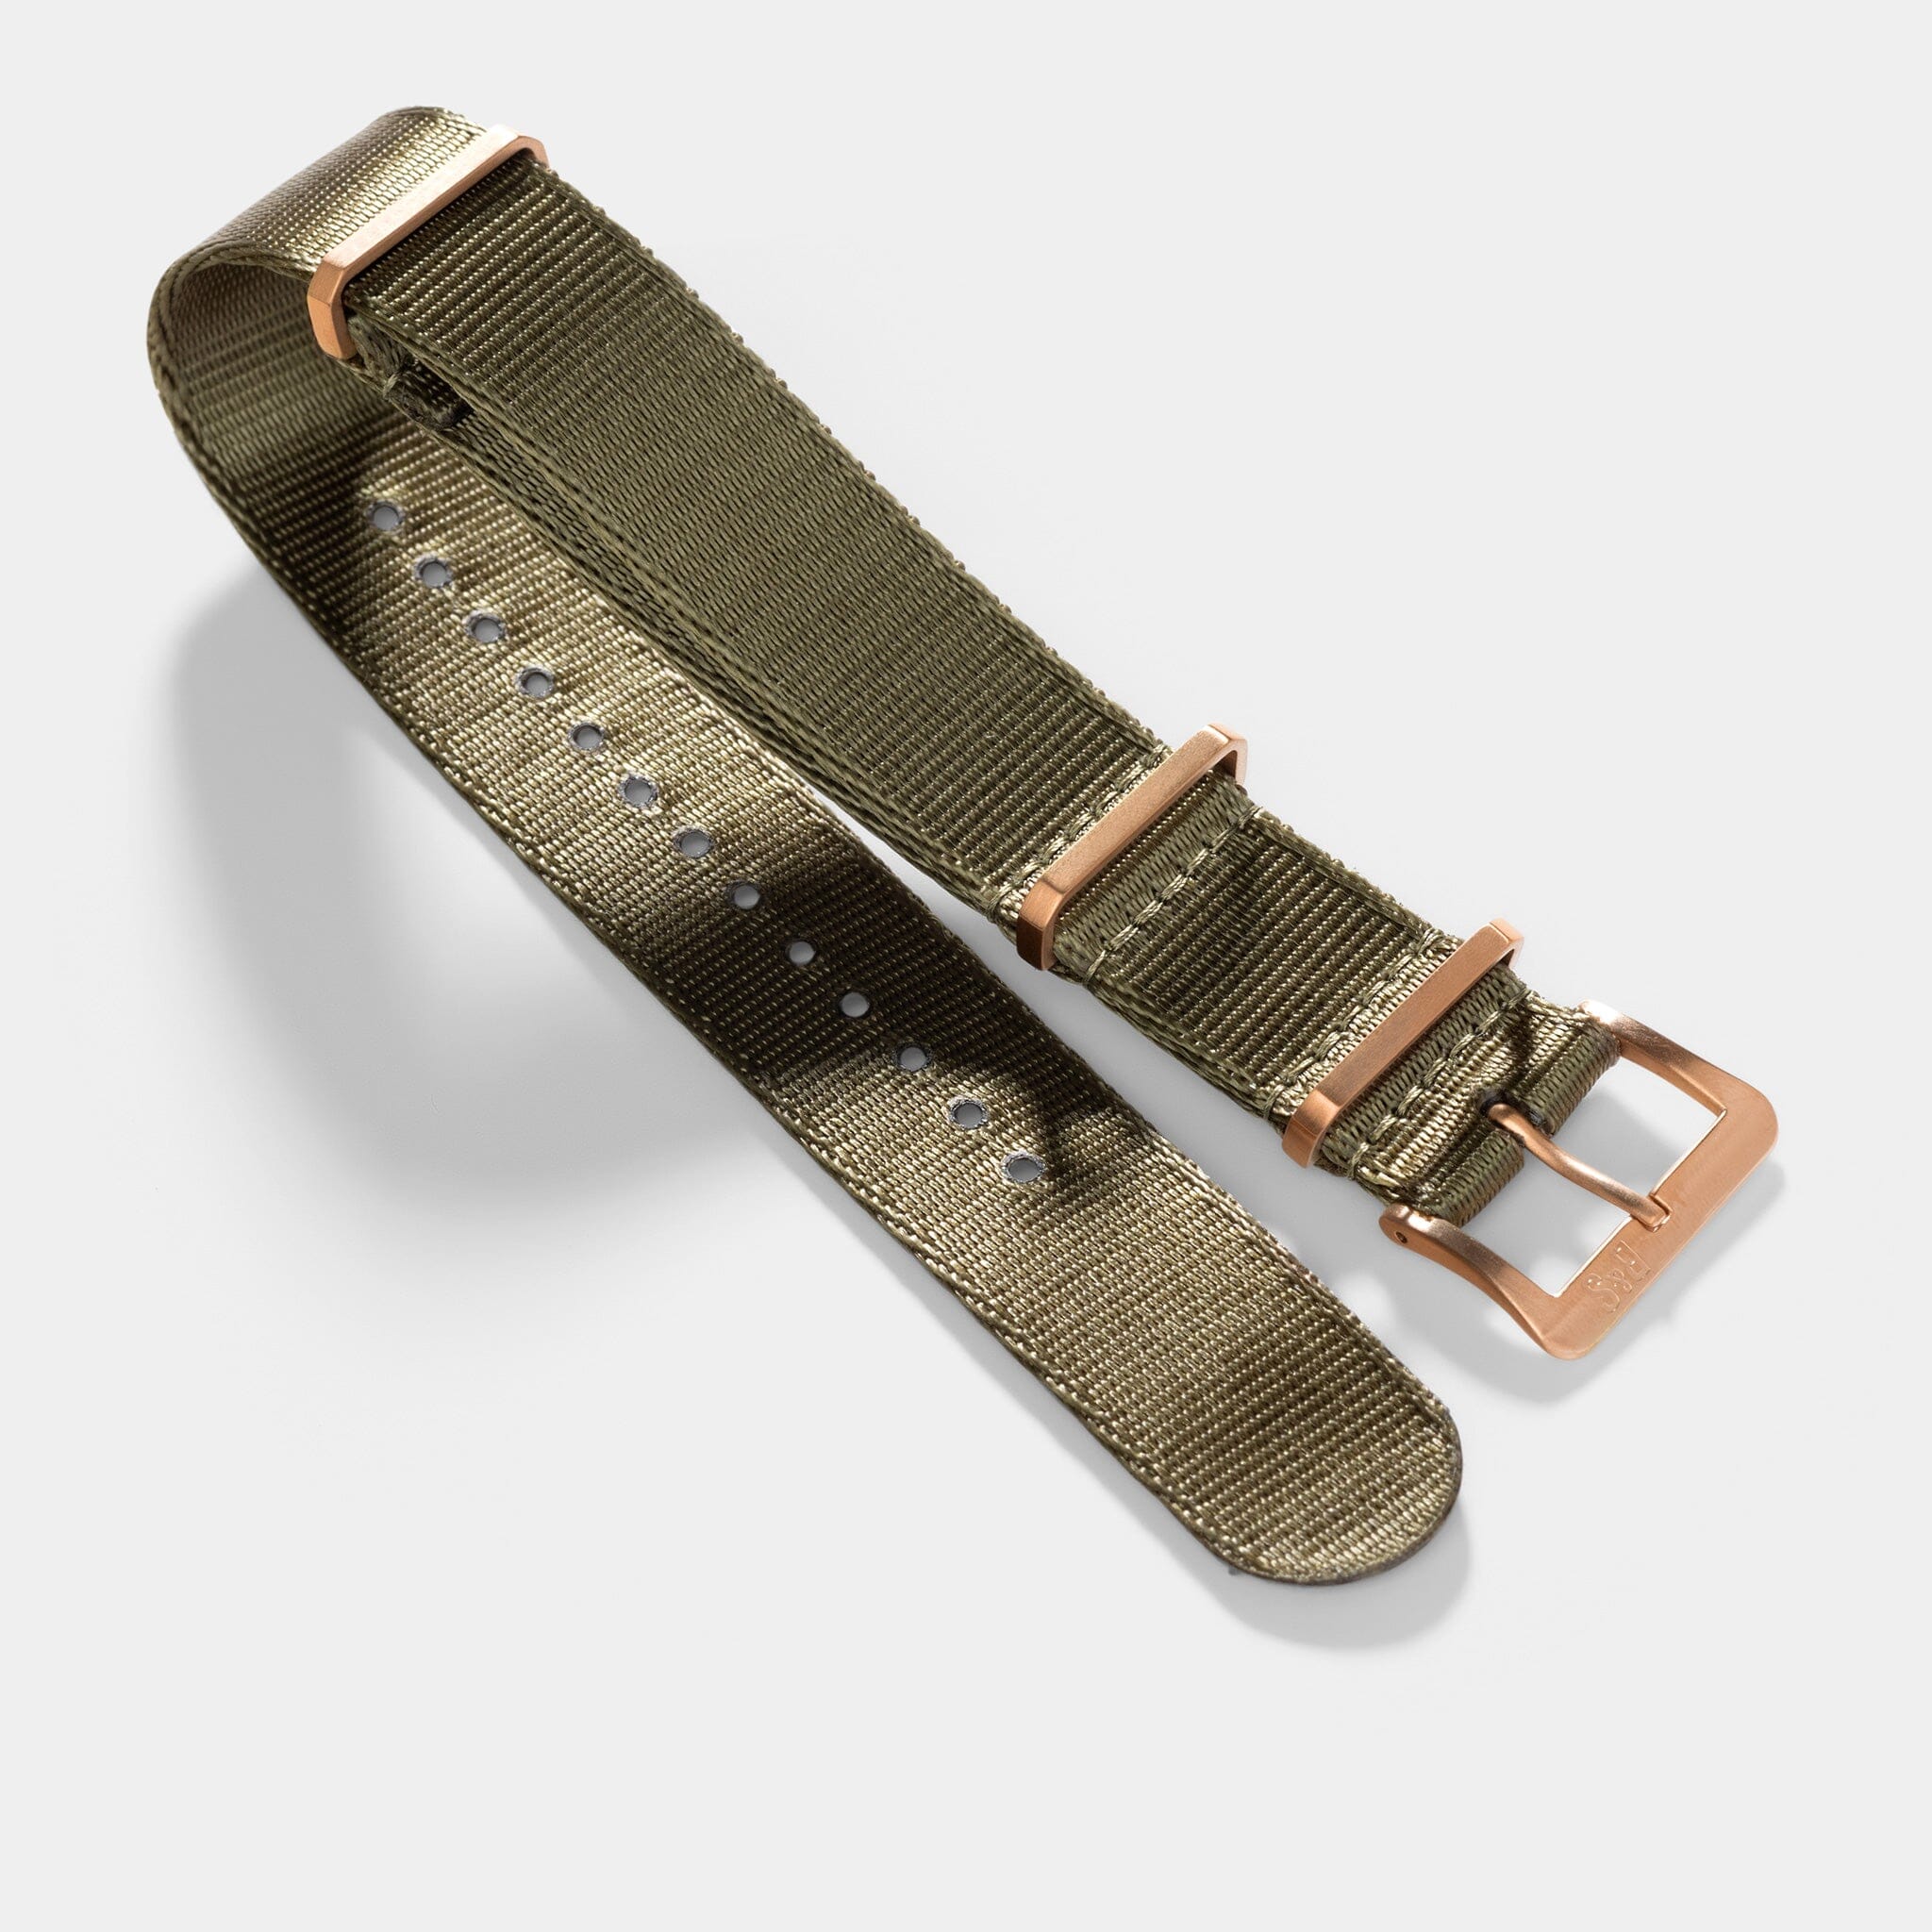 Deluxe Nylon Single Pass Watch Strap Olive Drab Green - Rose Gold Brushed